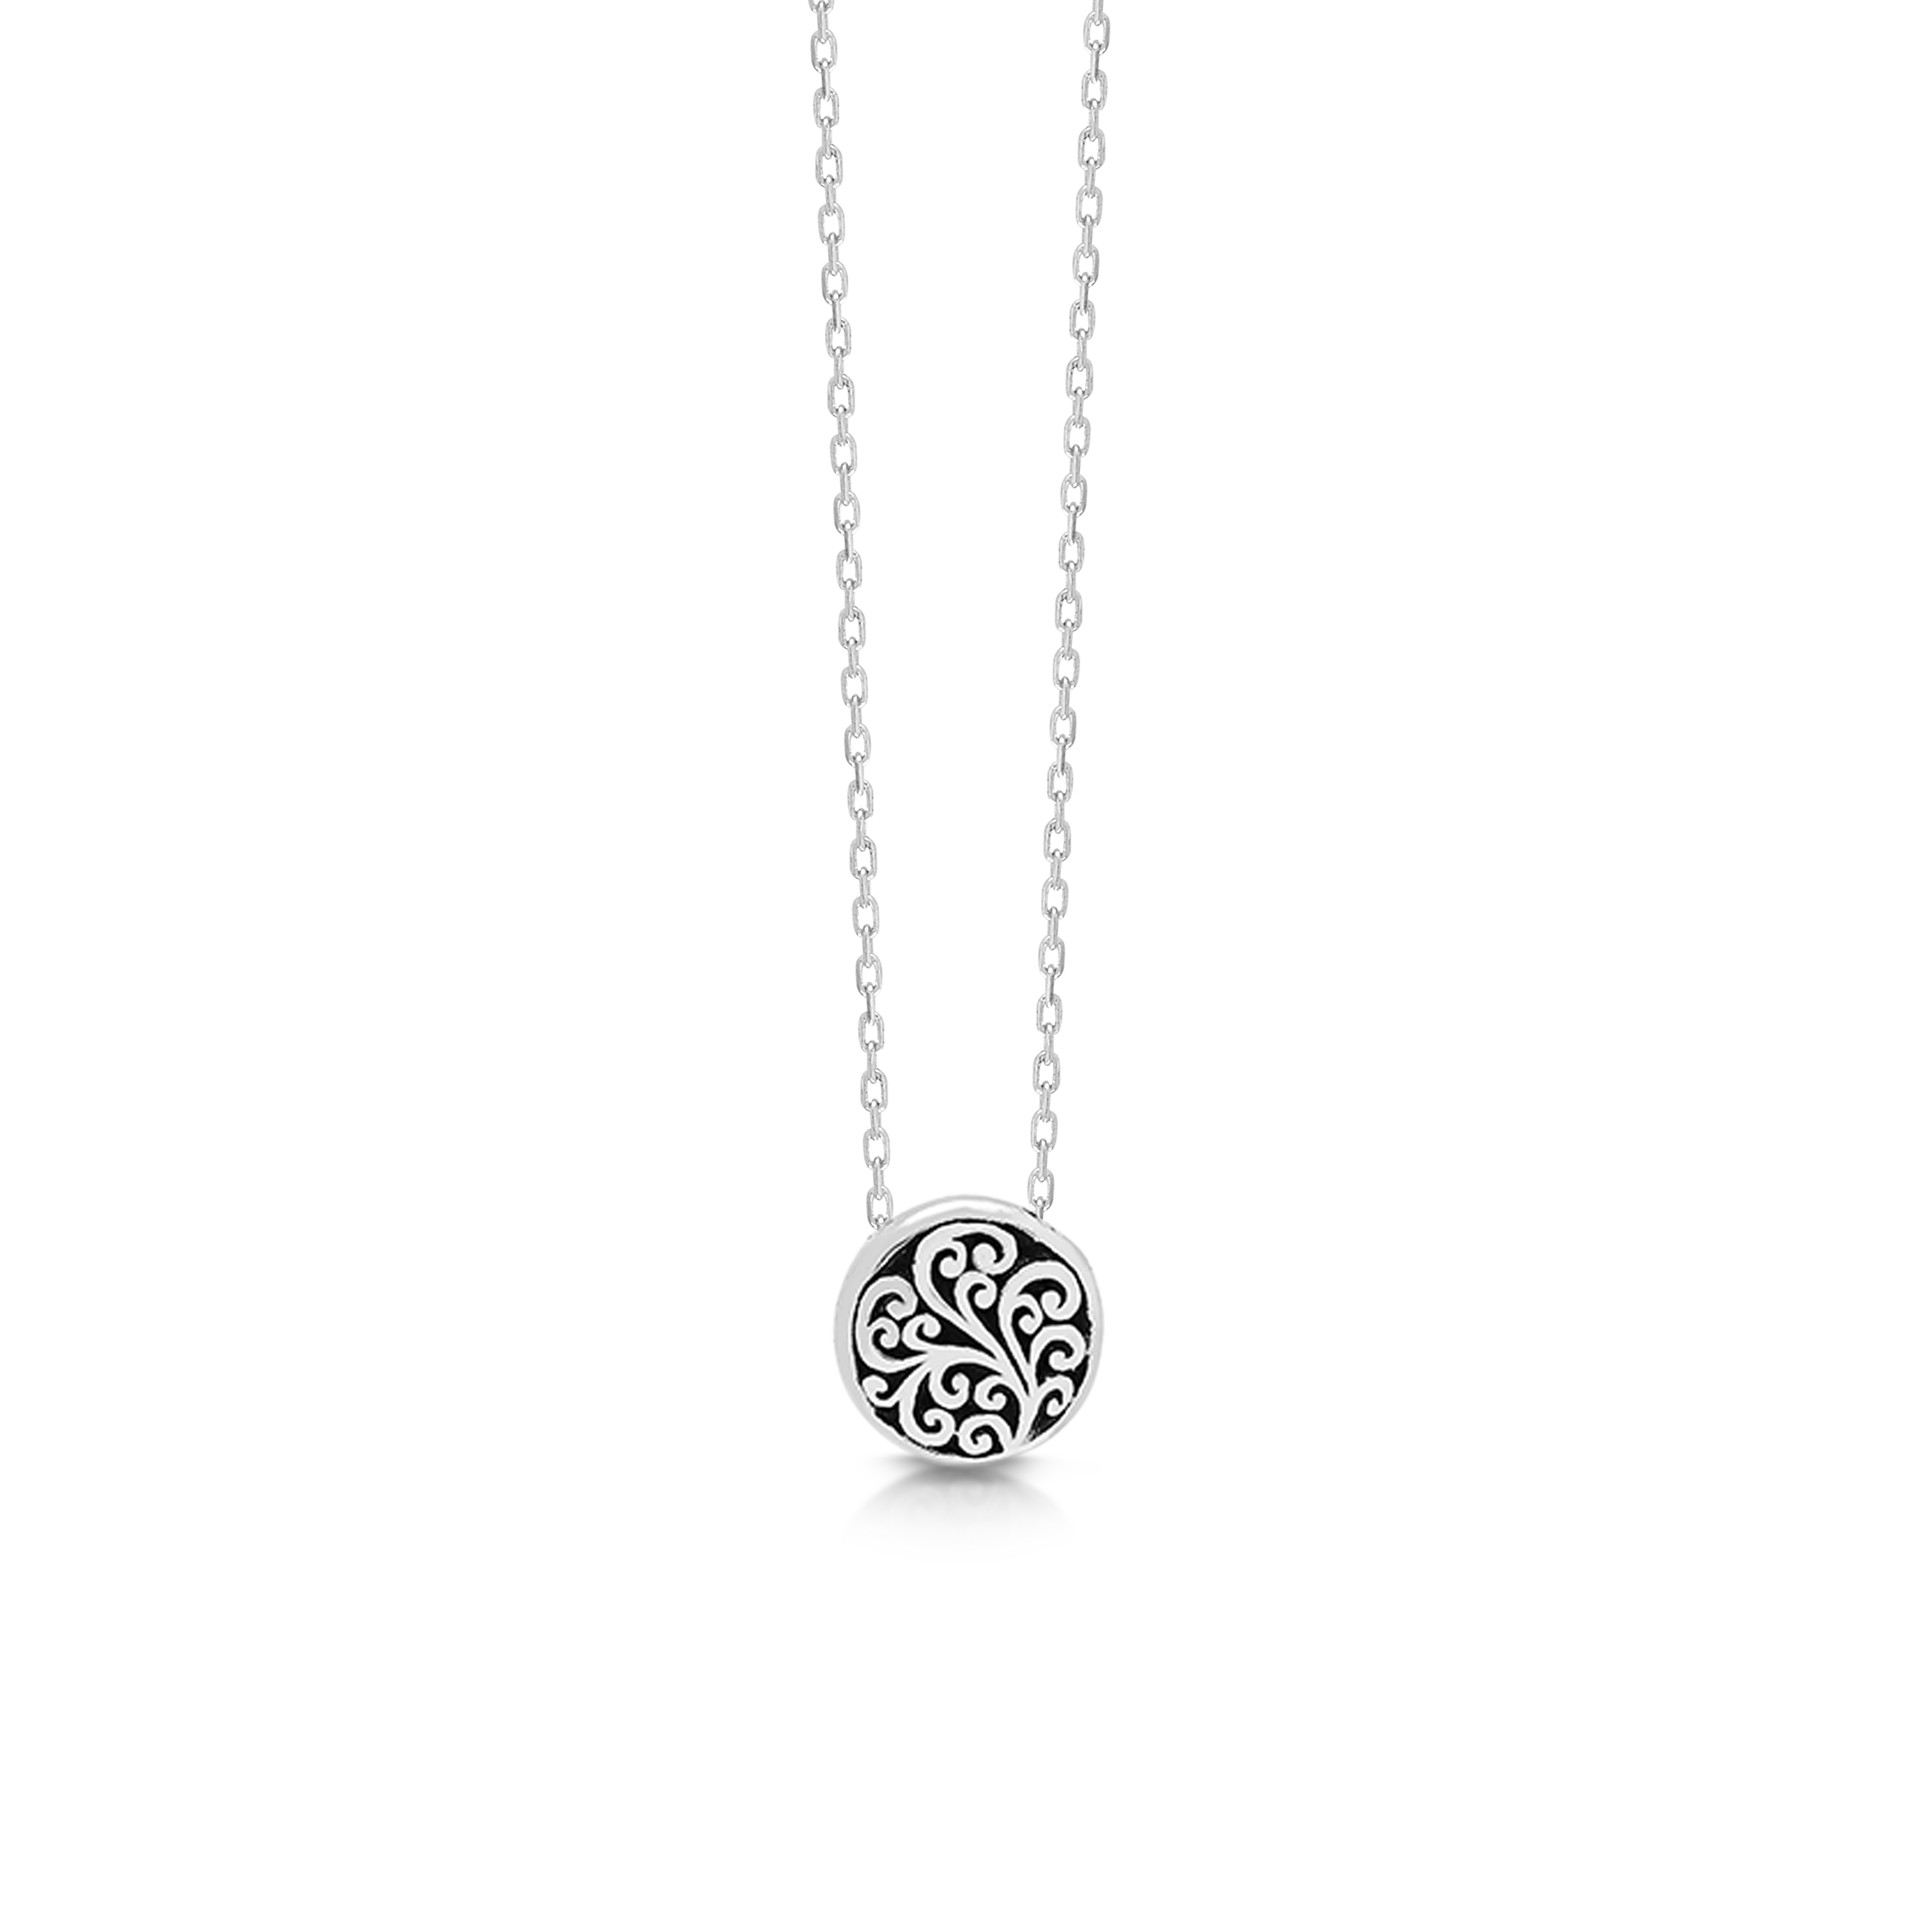 9726 Signature LH Scroll Sterling Silver Delicate Round Pendant Necklace in 18" Adjustable Chain, Pendant Size 10mm by Lois Hill